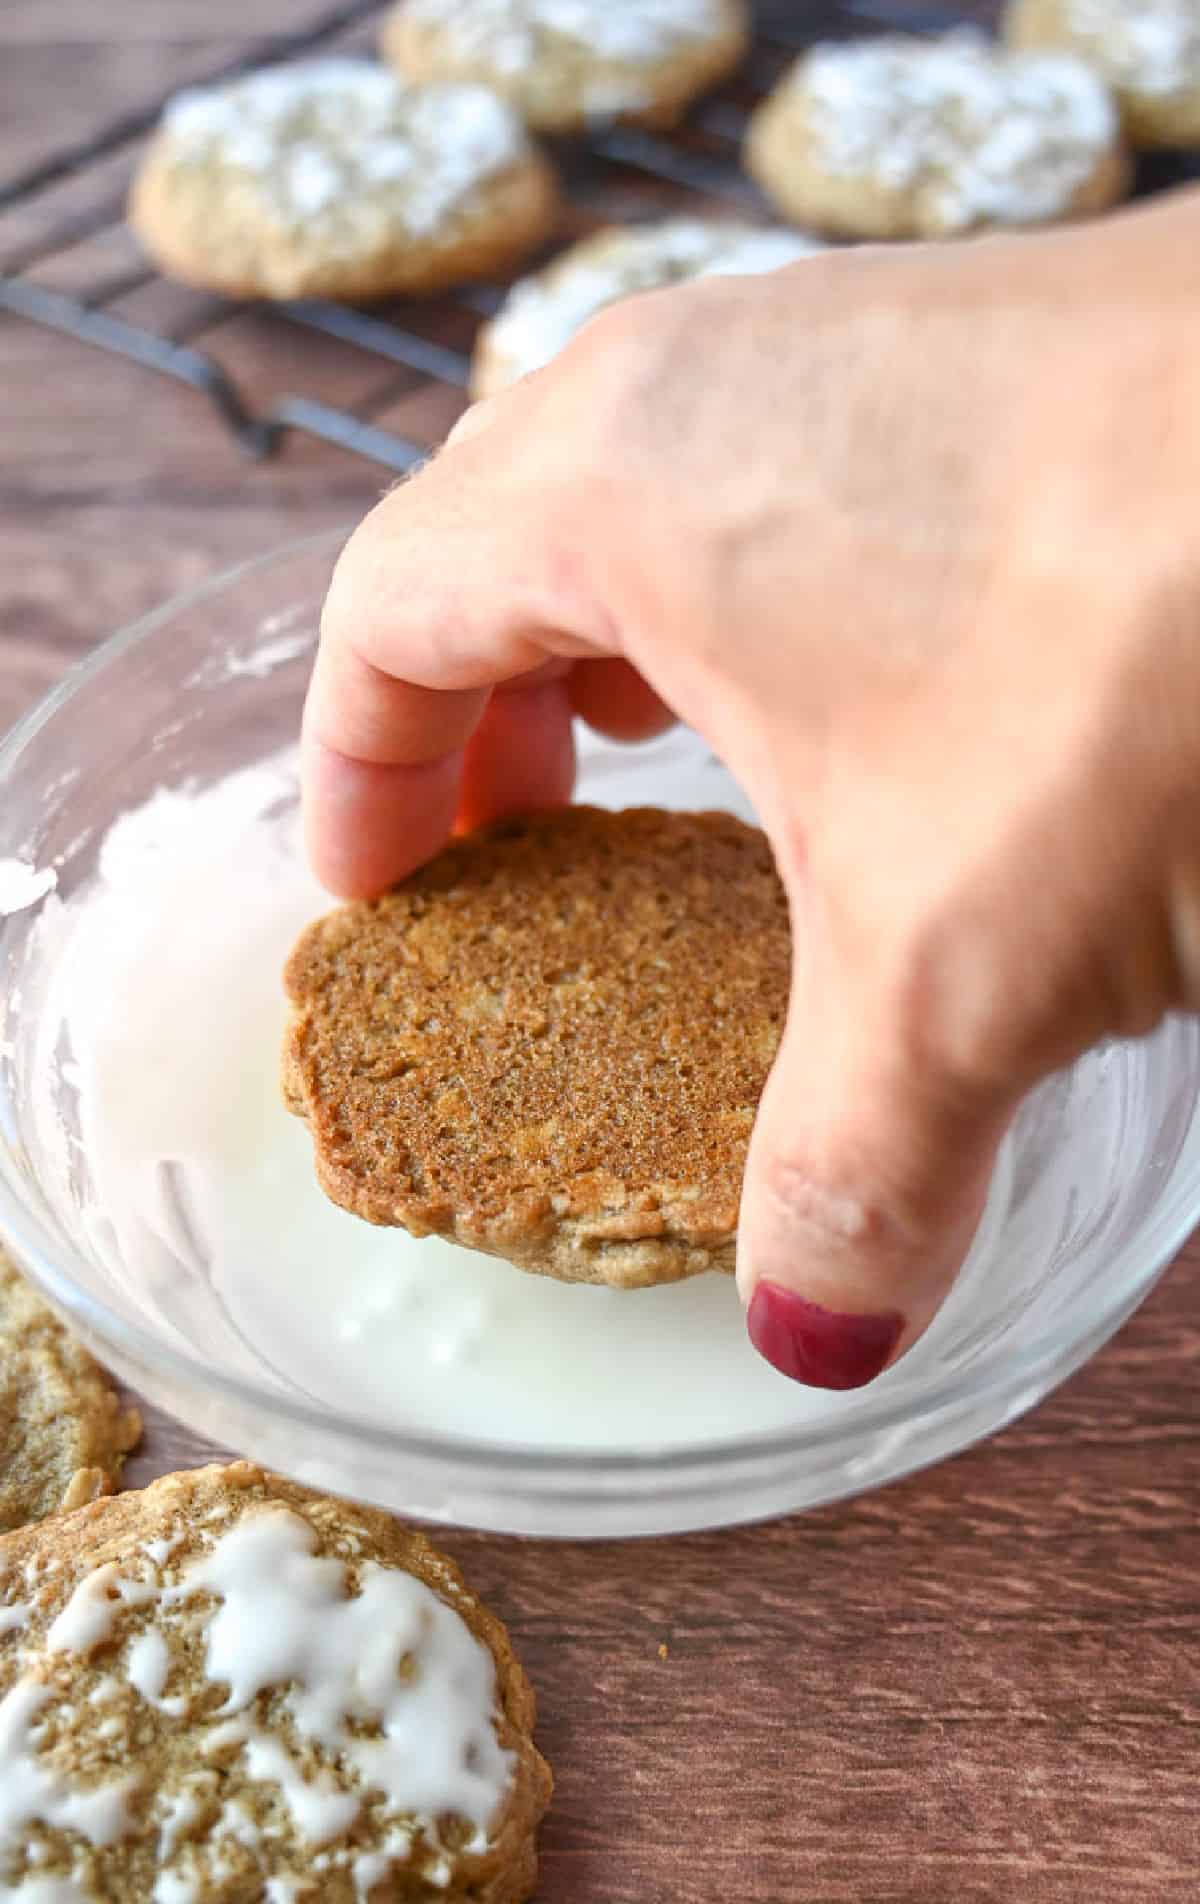 An oatmeal cookie being dipped into icing.